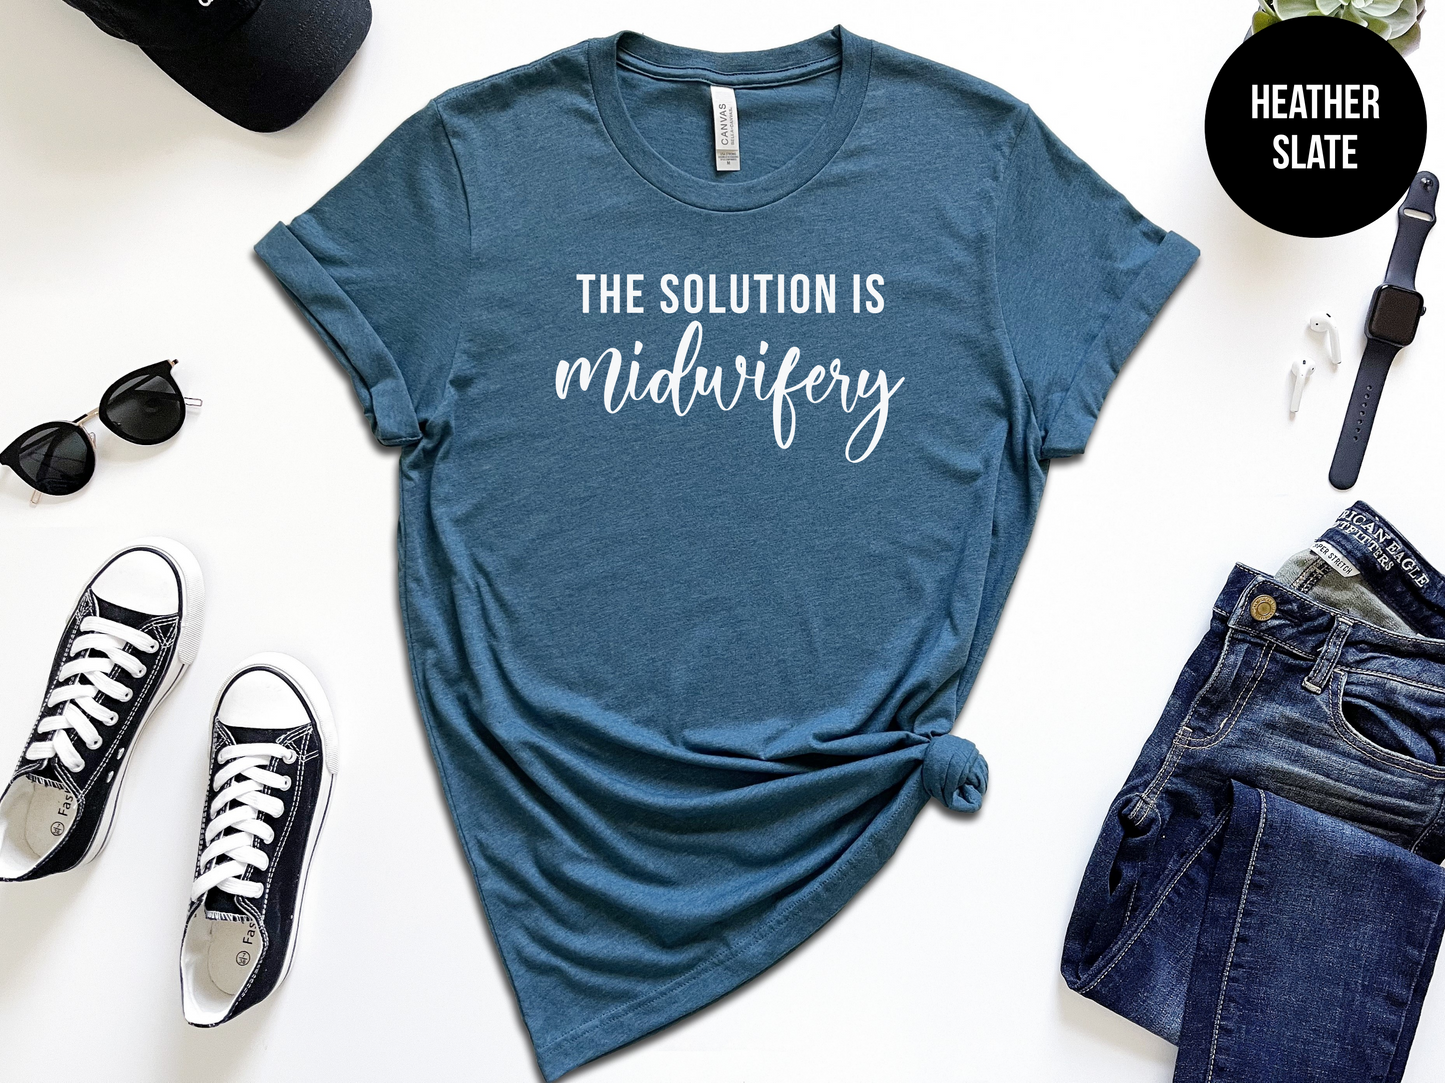 The Solution is Midwifery